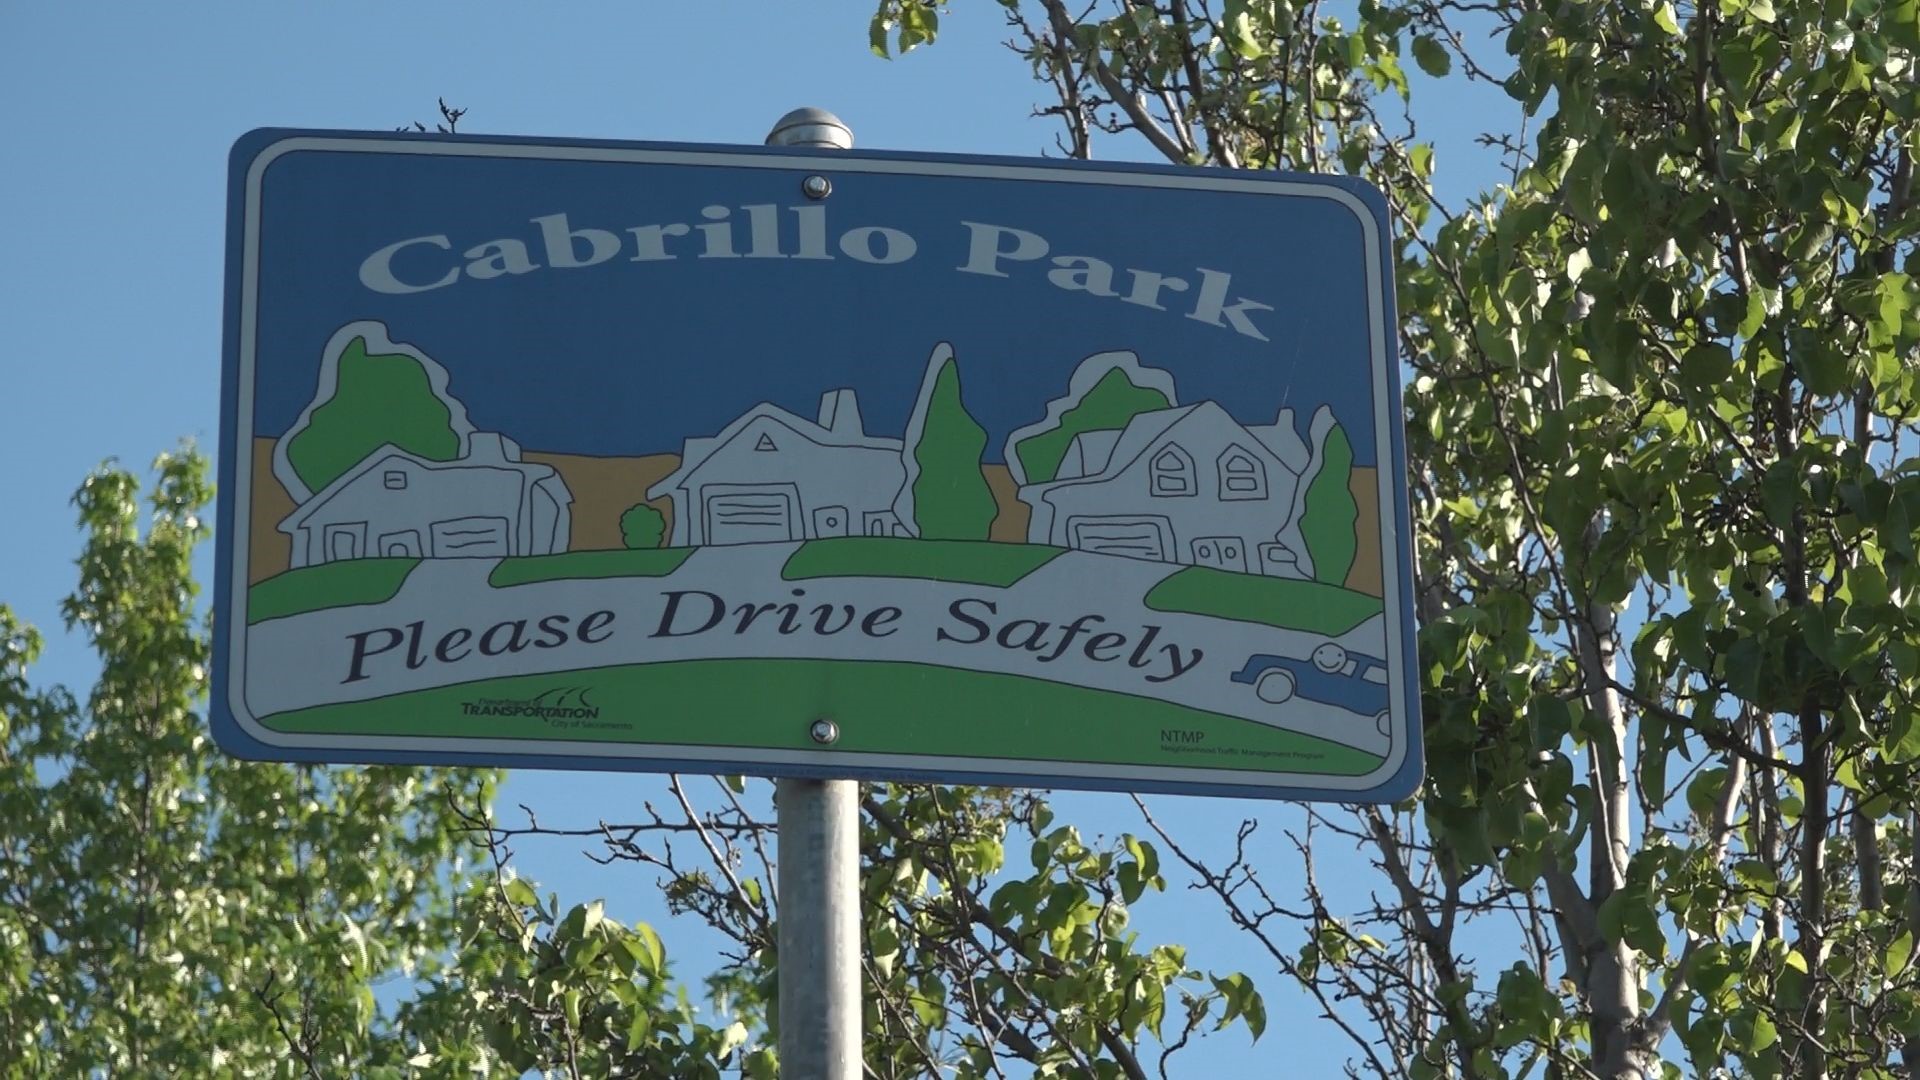 At a special town hall meeting Wednesday night, the Cabrillo Park Neighborhood Association - part of the wider Meadowview community - met to discuss what's good and what's challenging in their area.